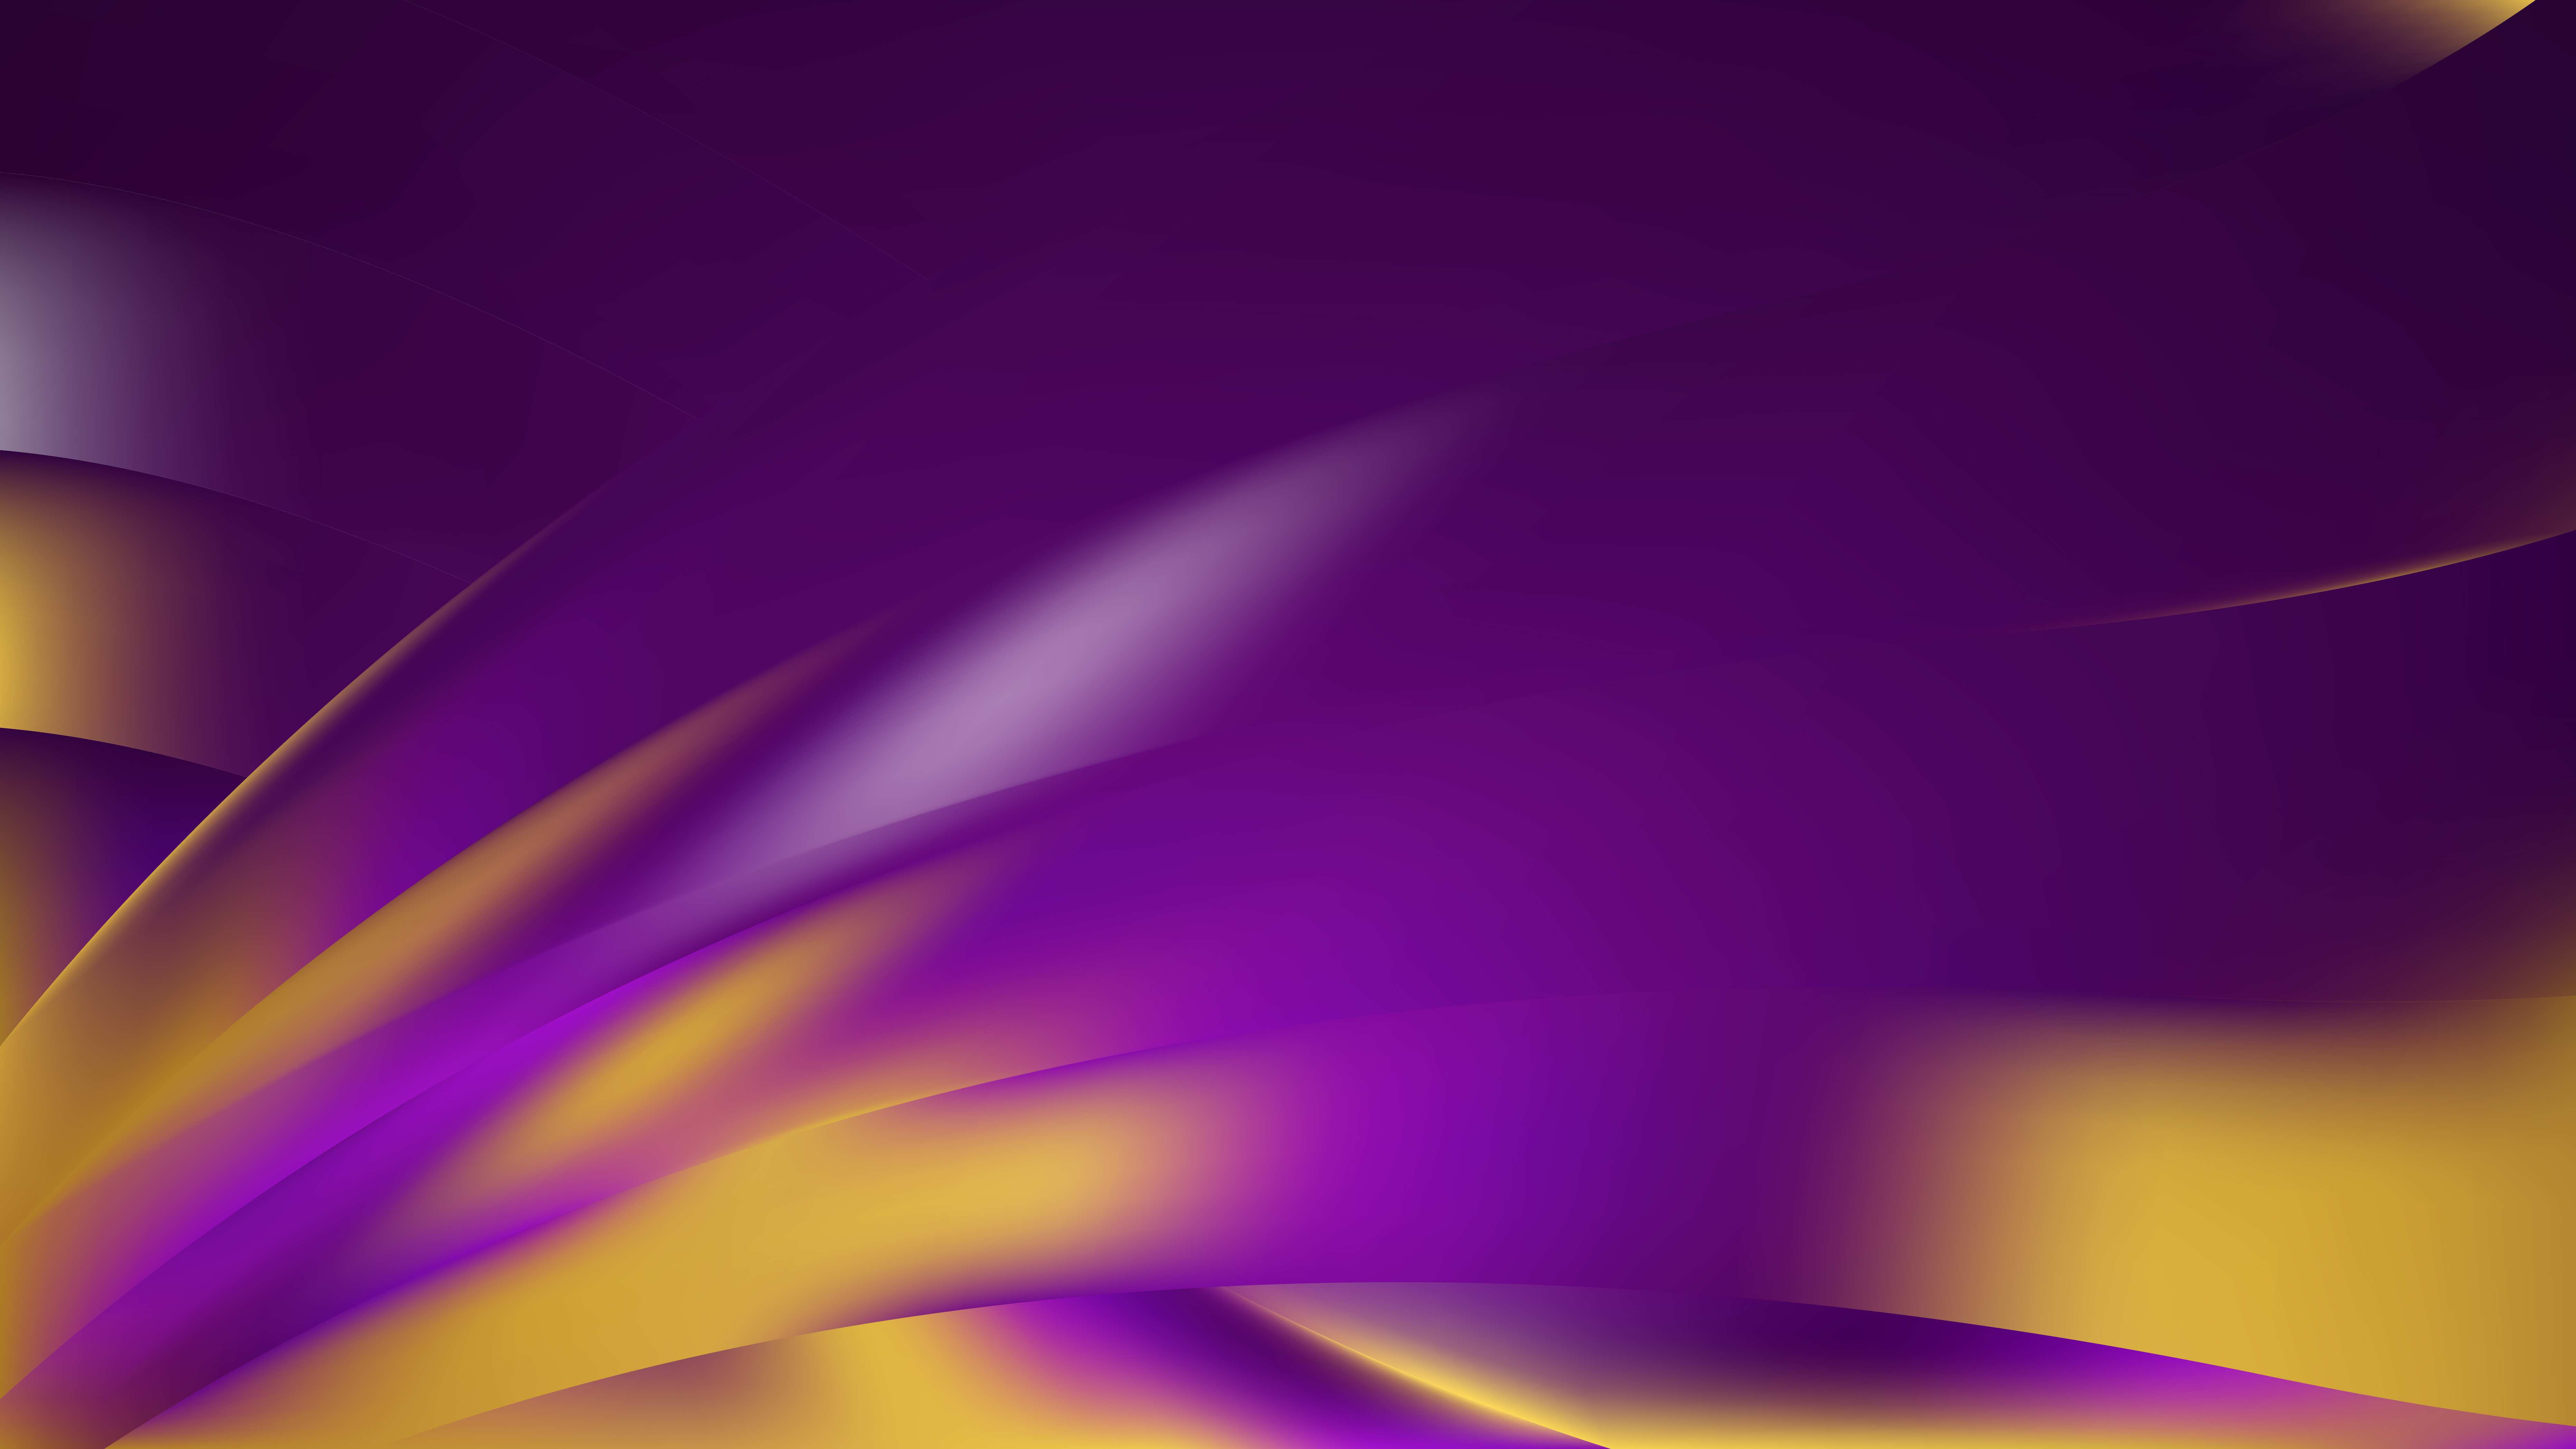 Free Abstract Purple and Gold Background Design